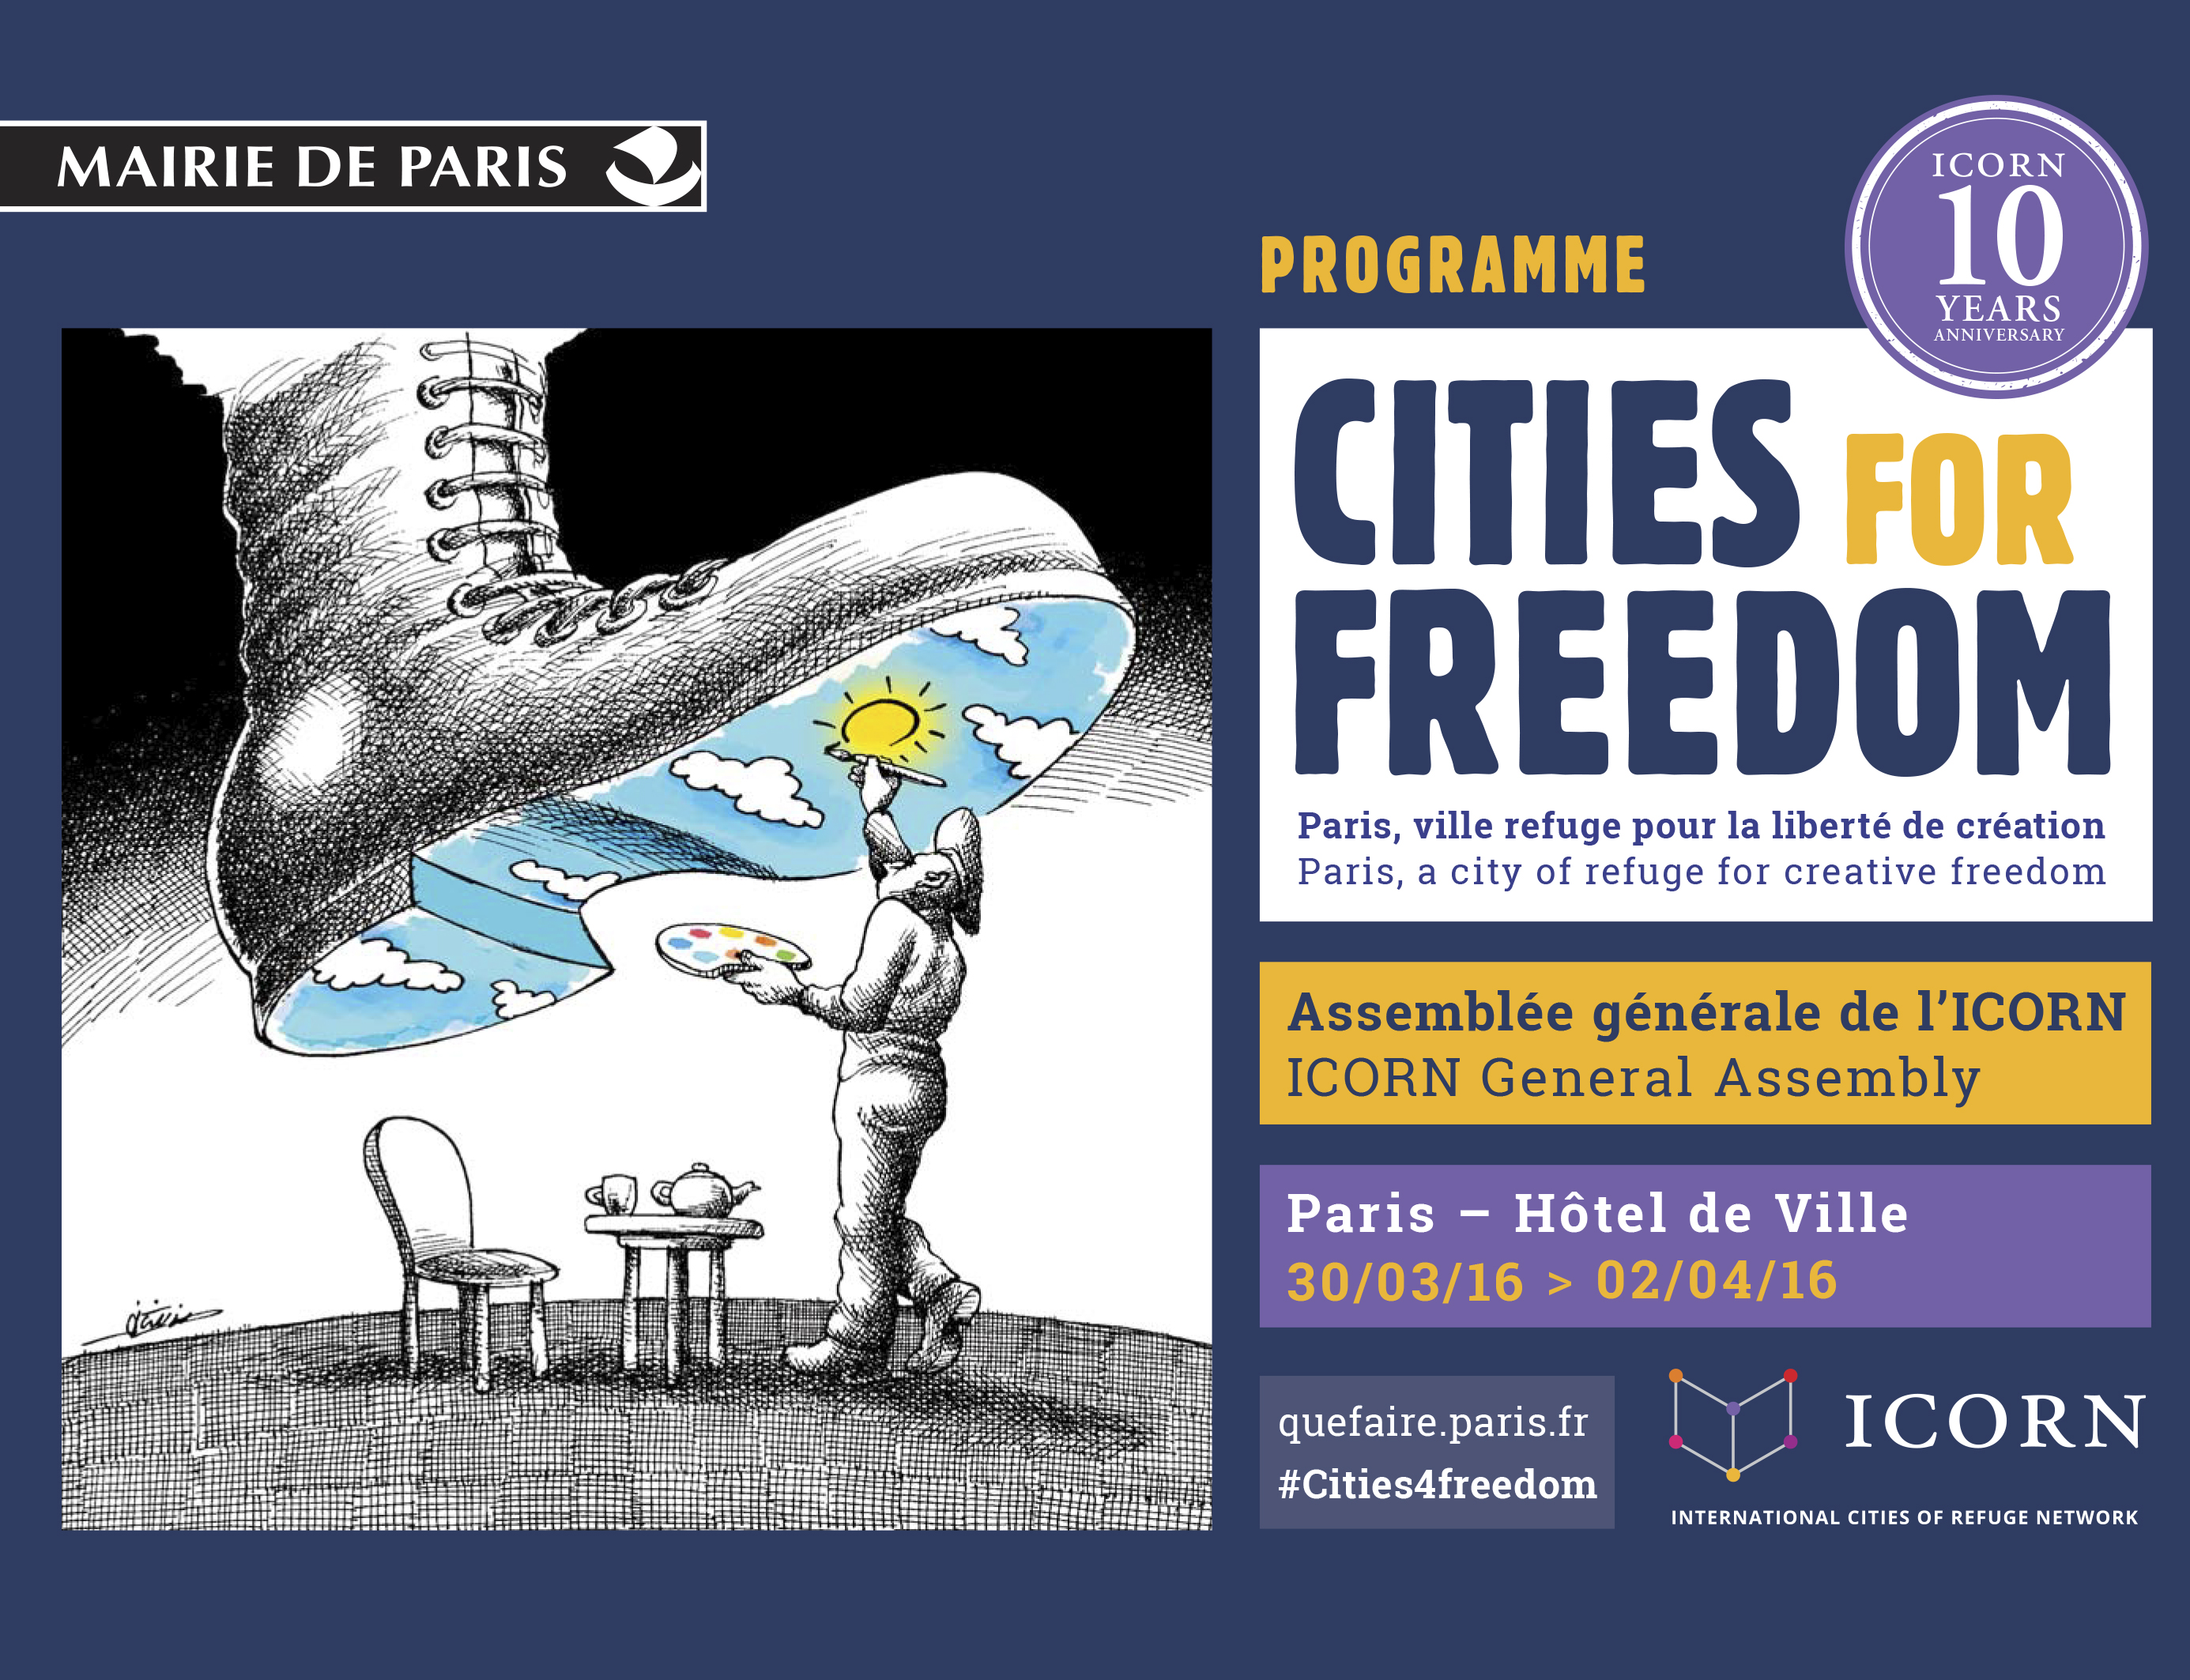 Cities for Freedom. Booklet for ICORN General Assembly and 10 years anniversary in Paris 2016. Photo.